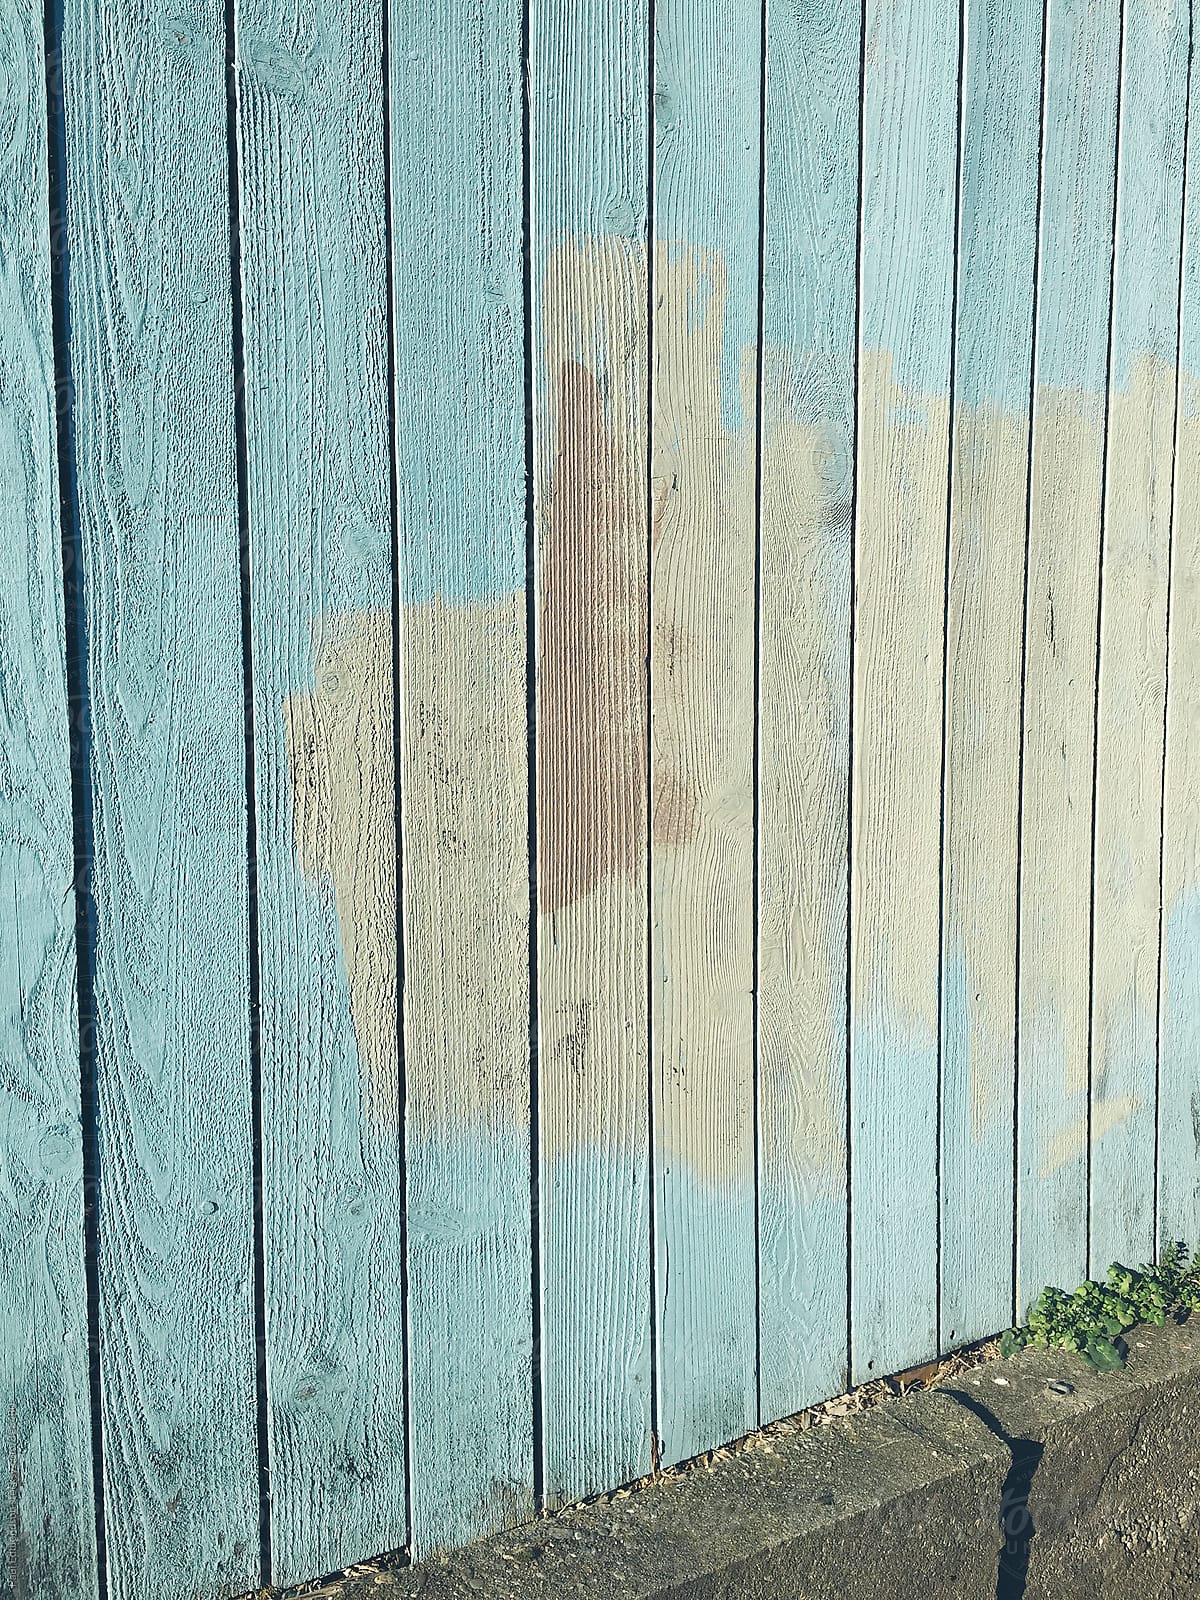 Paint covering graffiti markings on urban fence